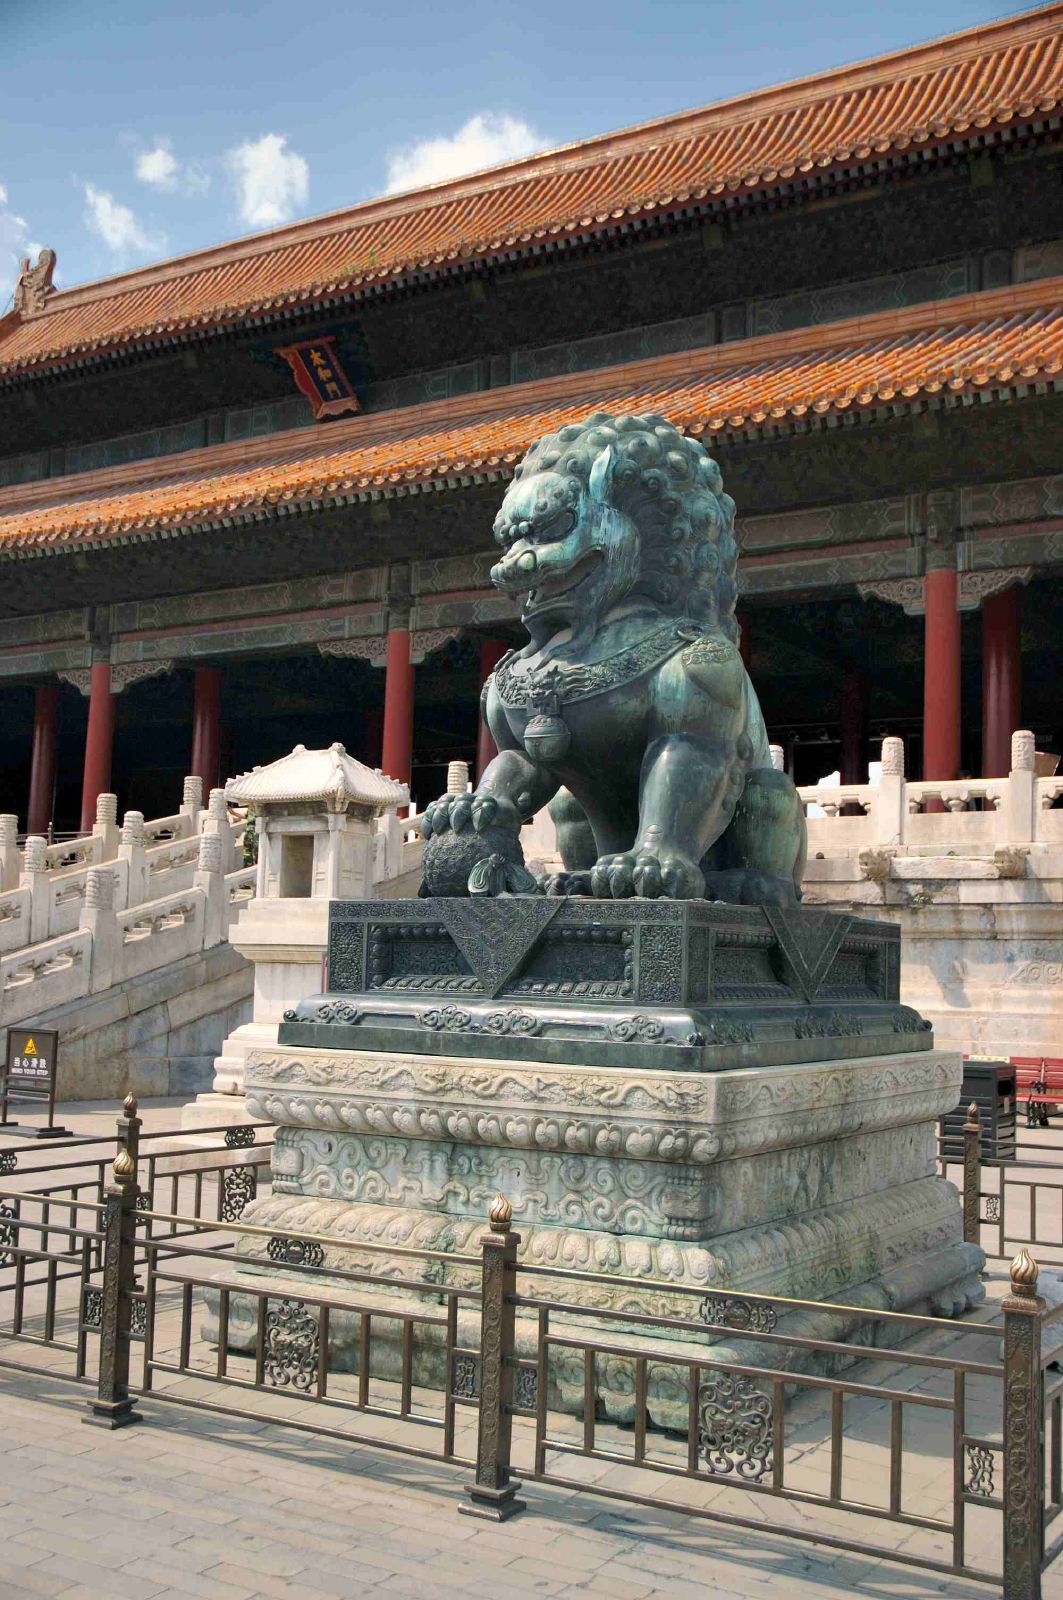 there is a lion statue in front of a building